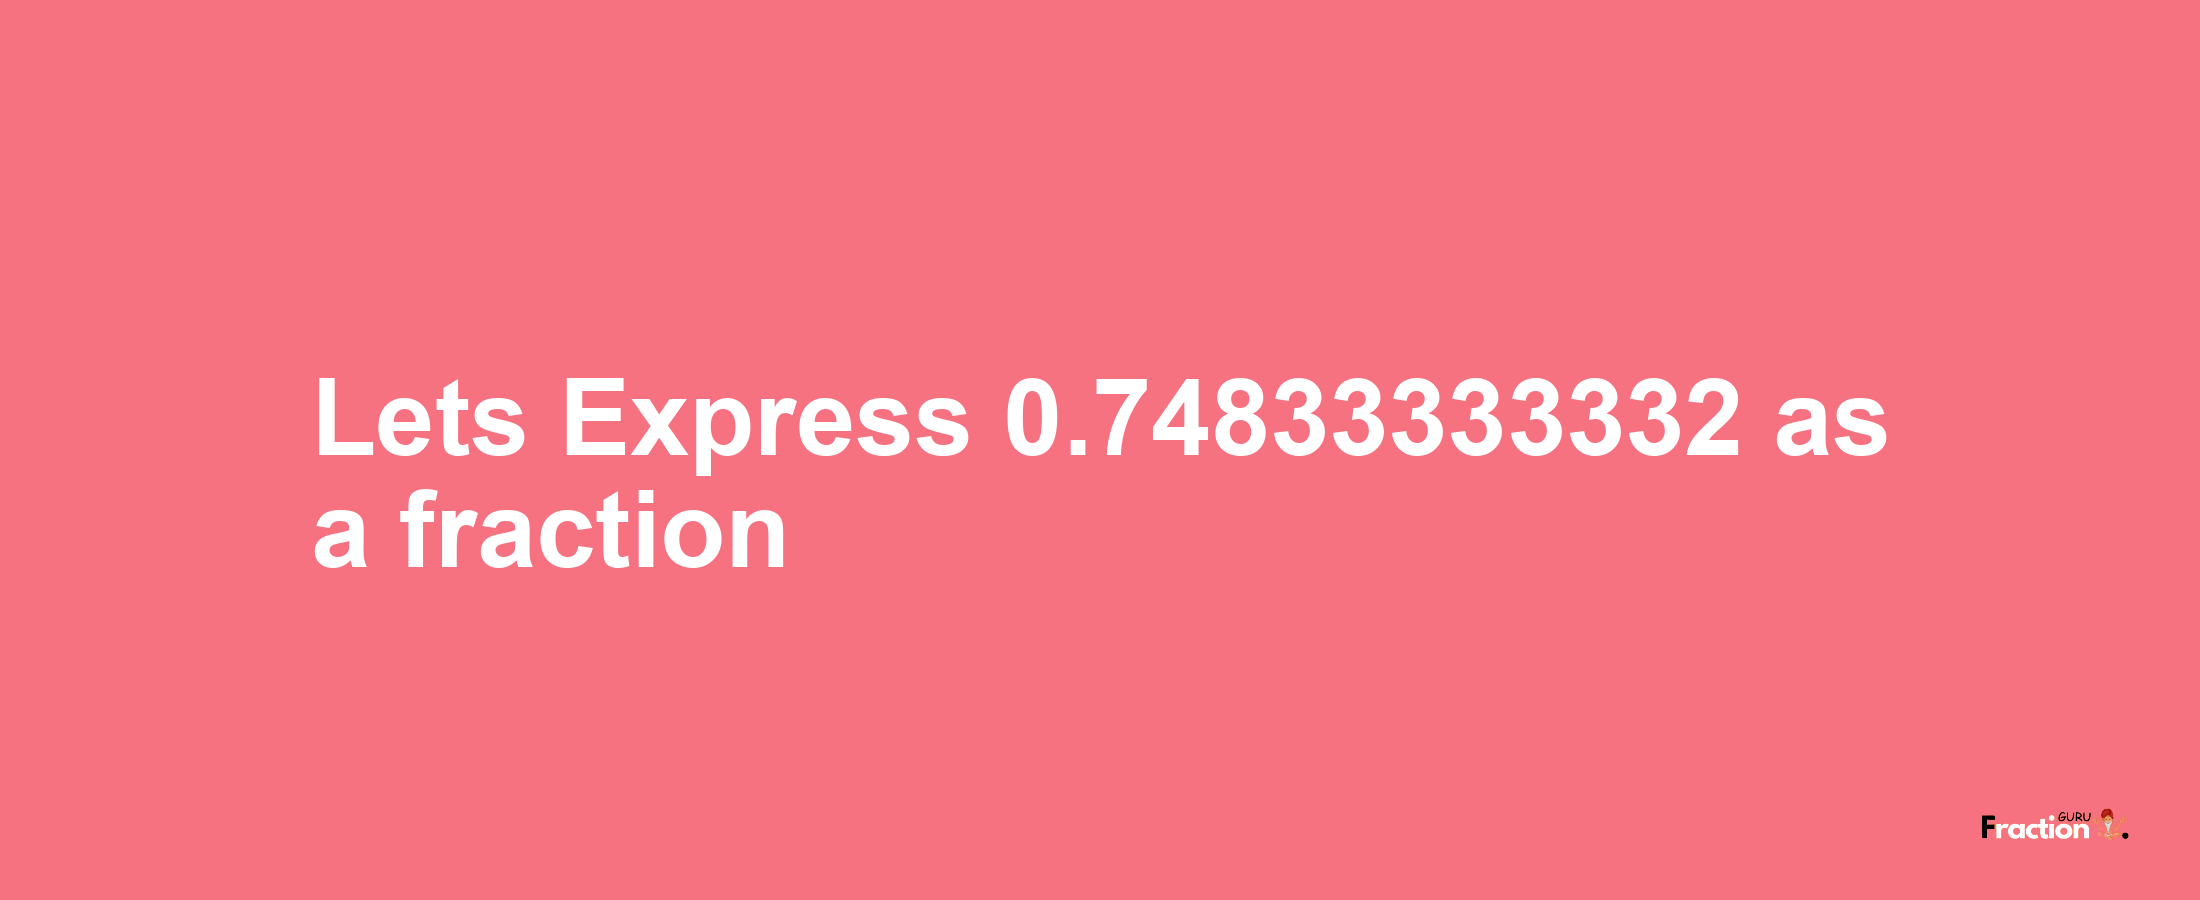 Lets Express 0.74833333332 as afraction